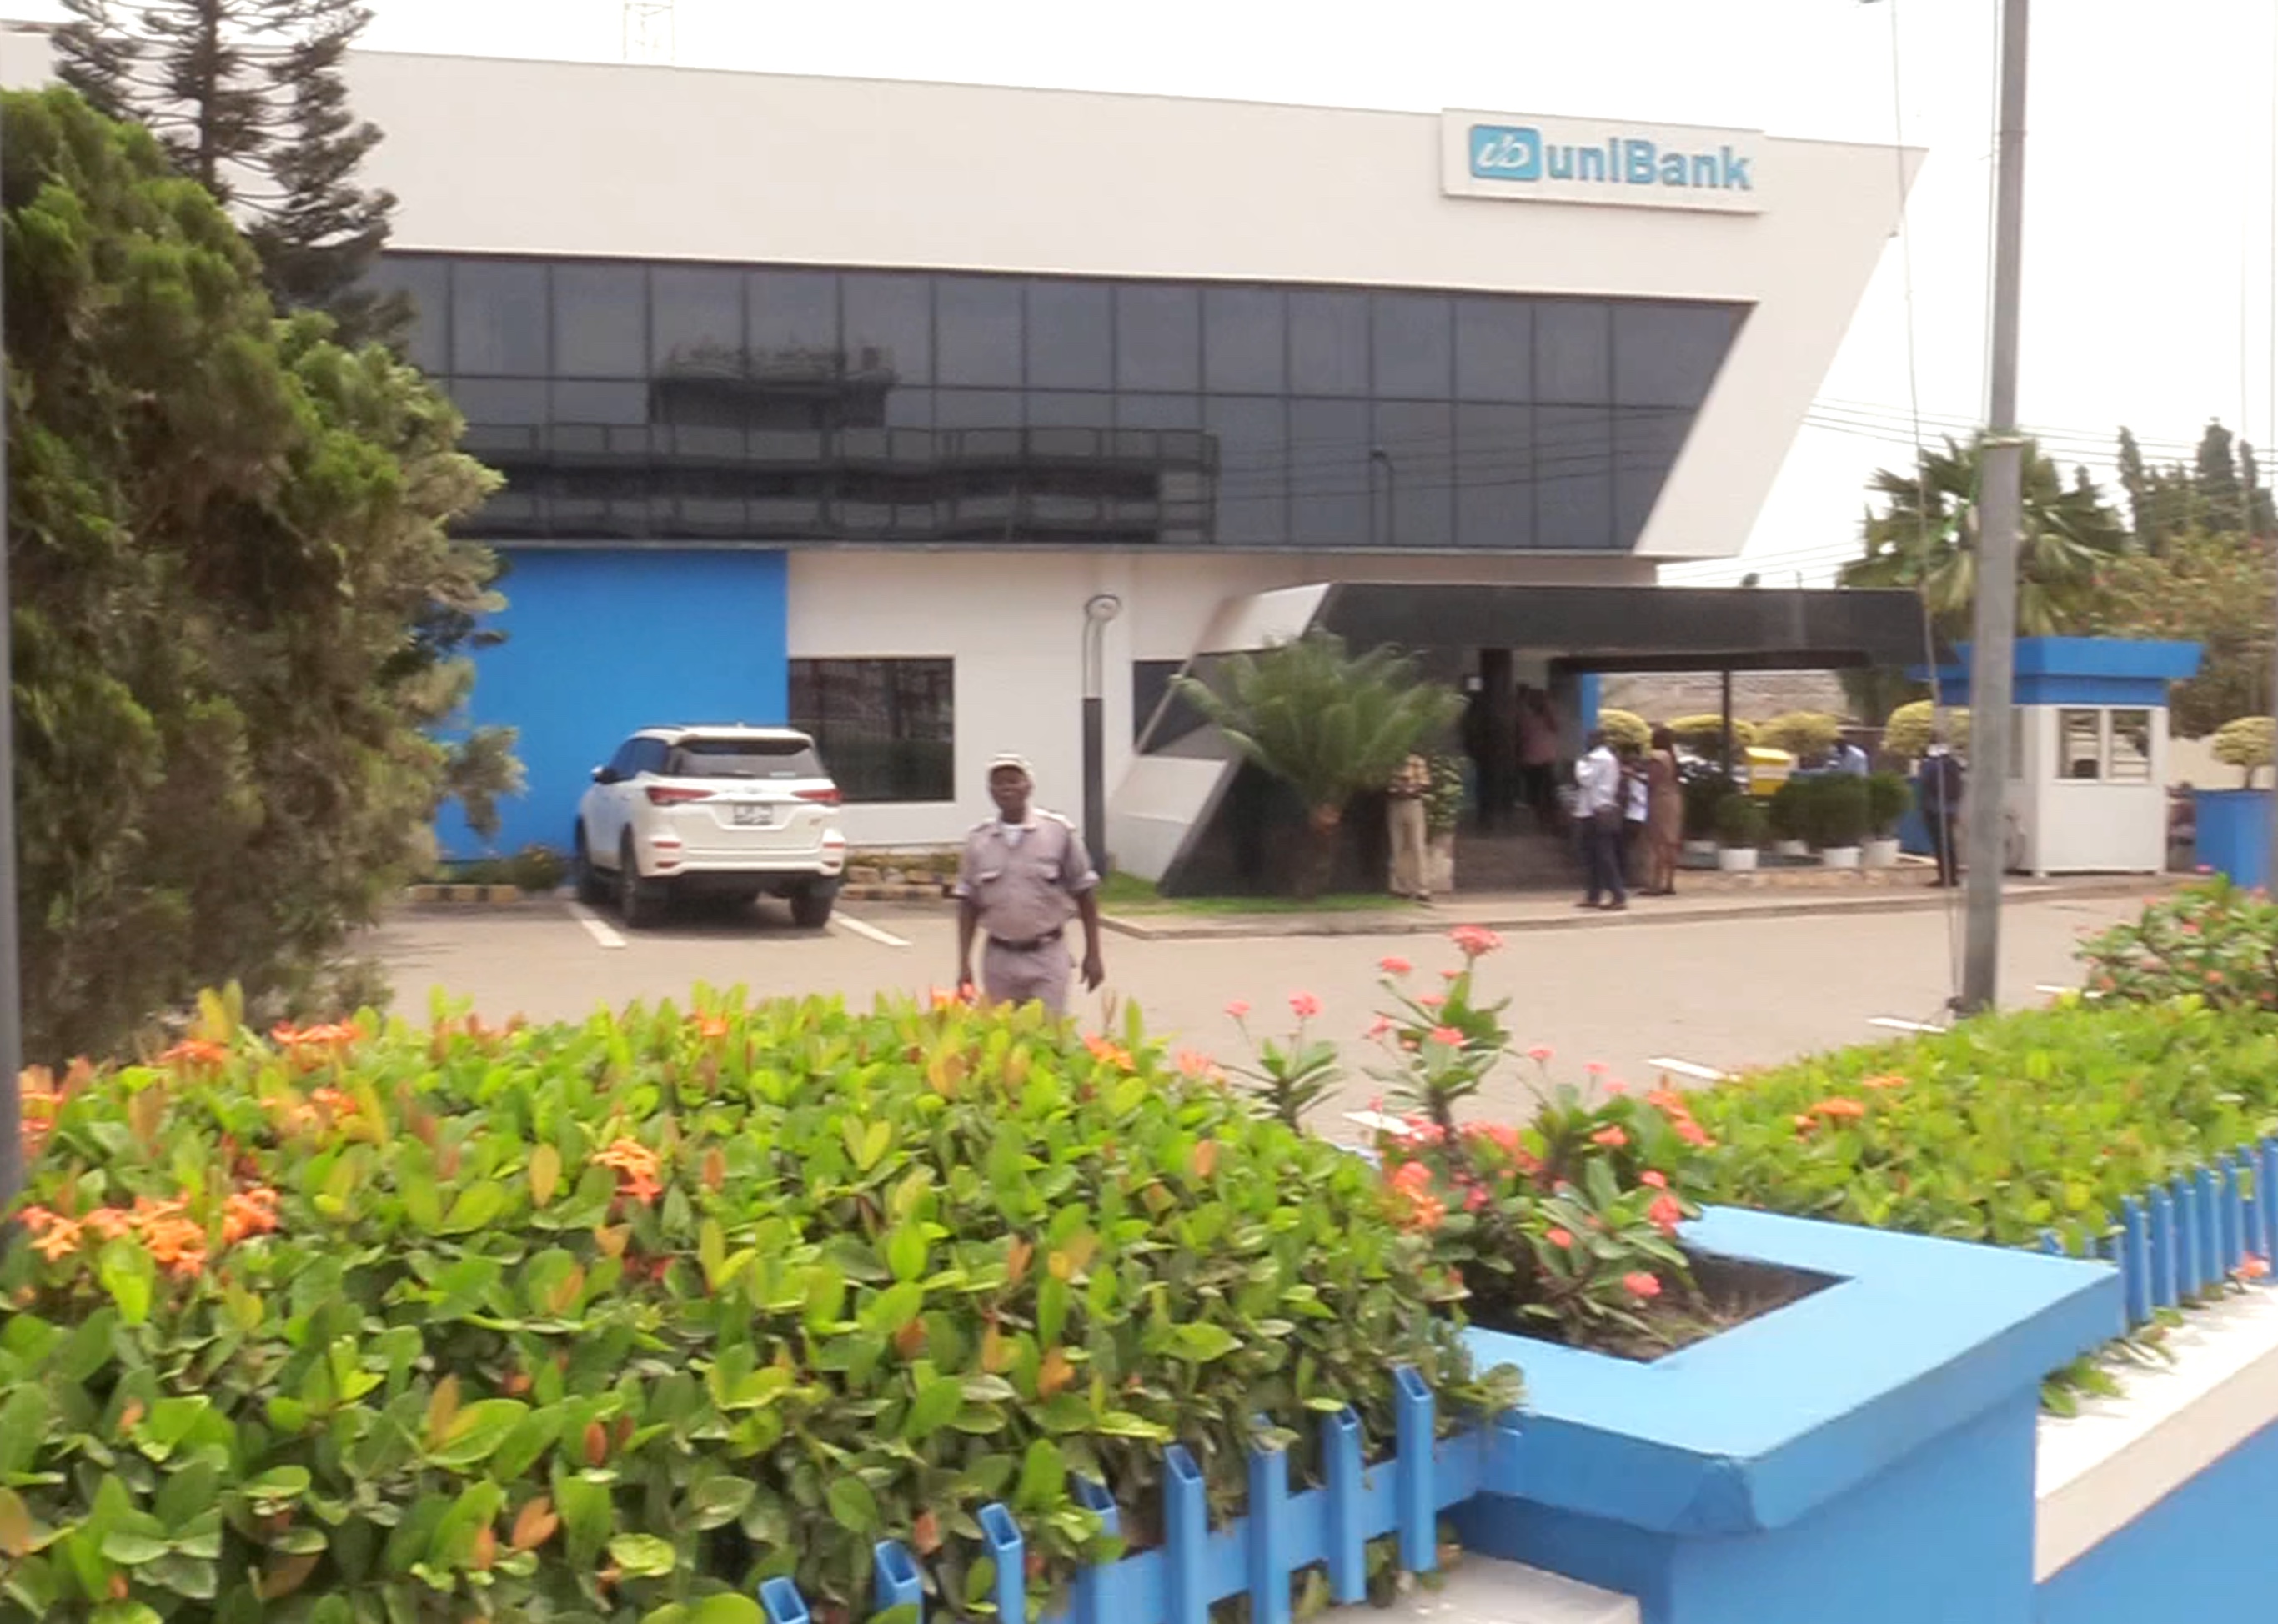 uniBank customers divided over bank's future